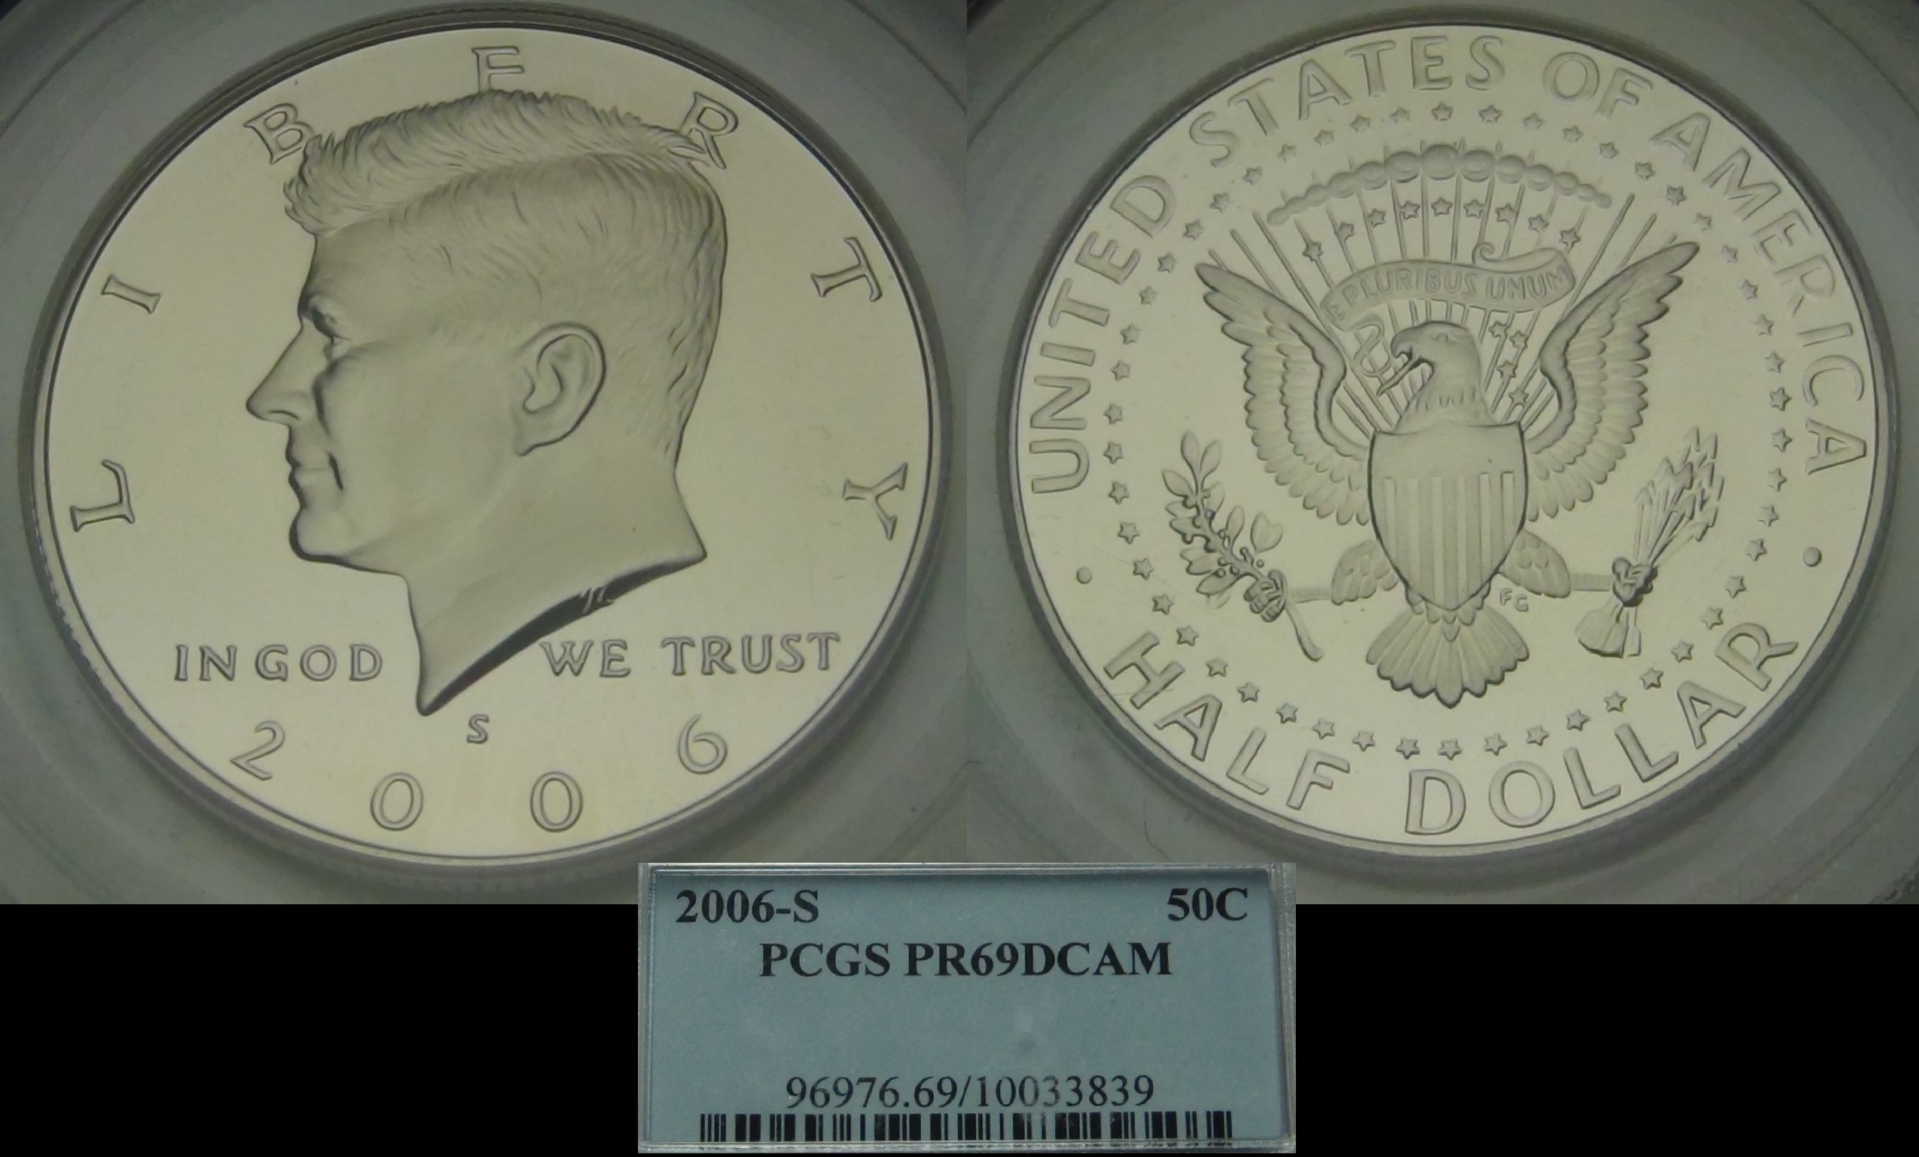 06-s pcgs.png